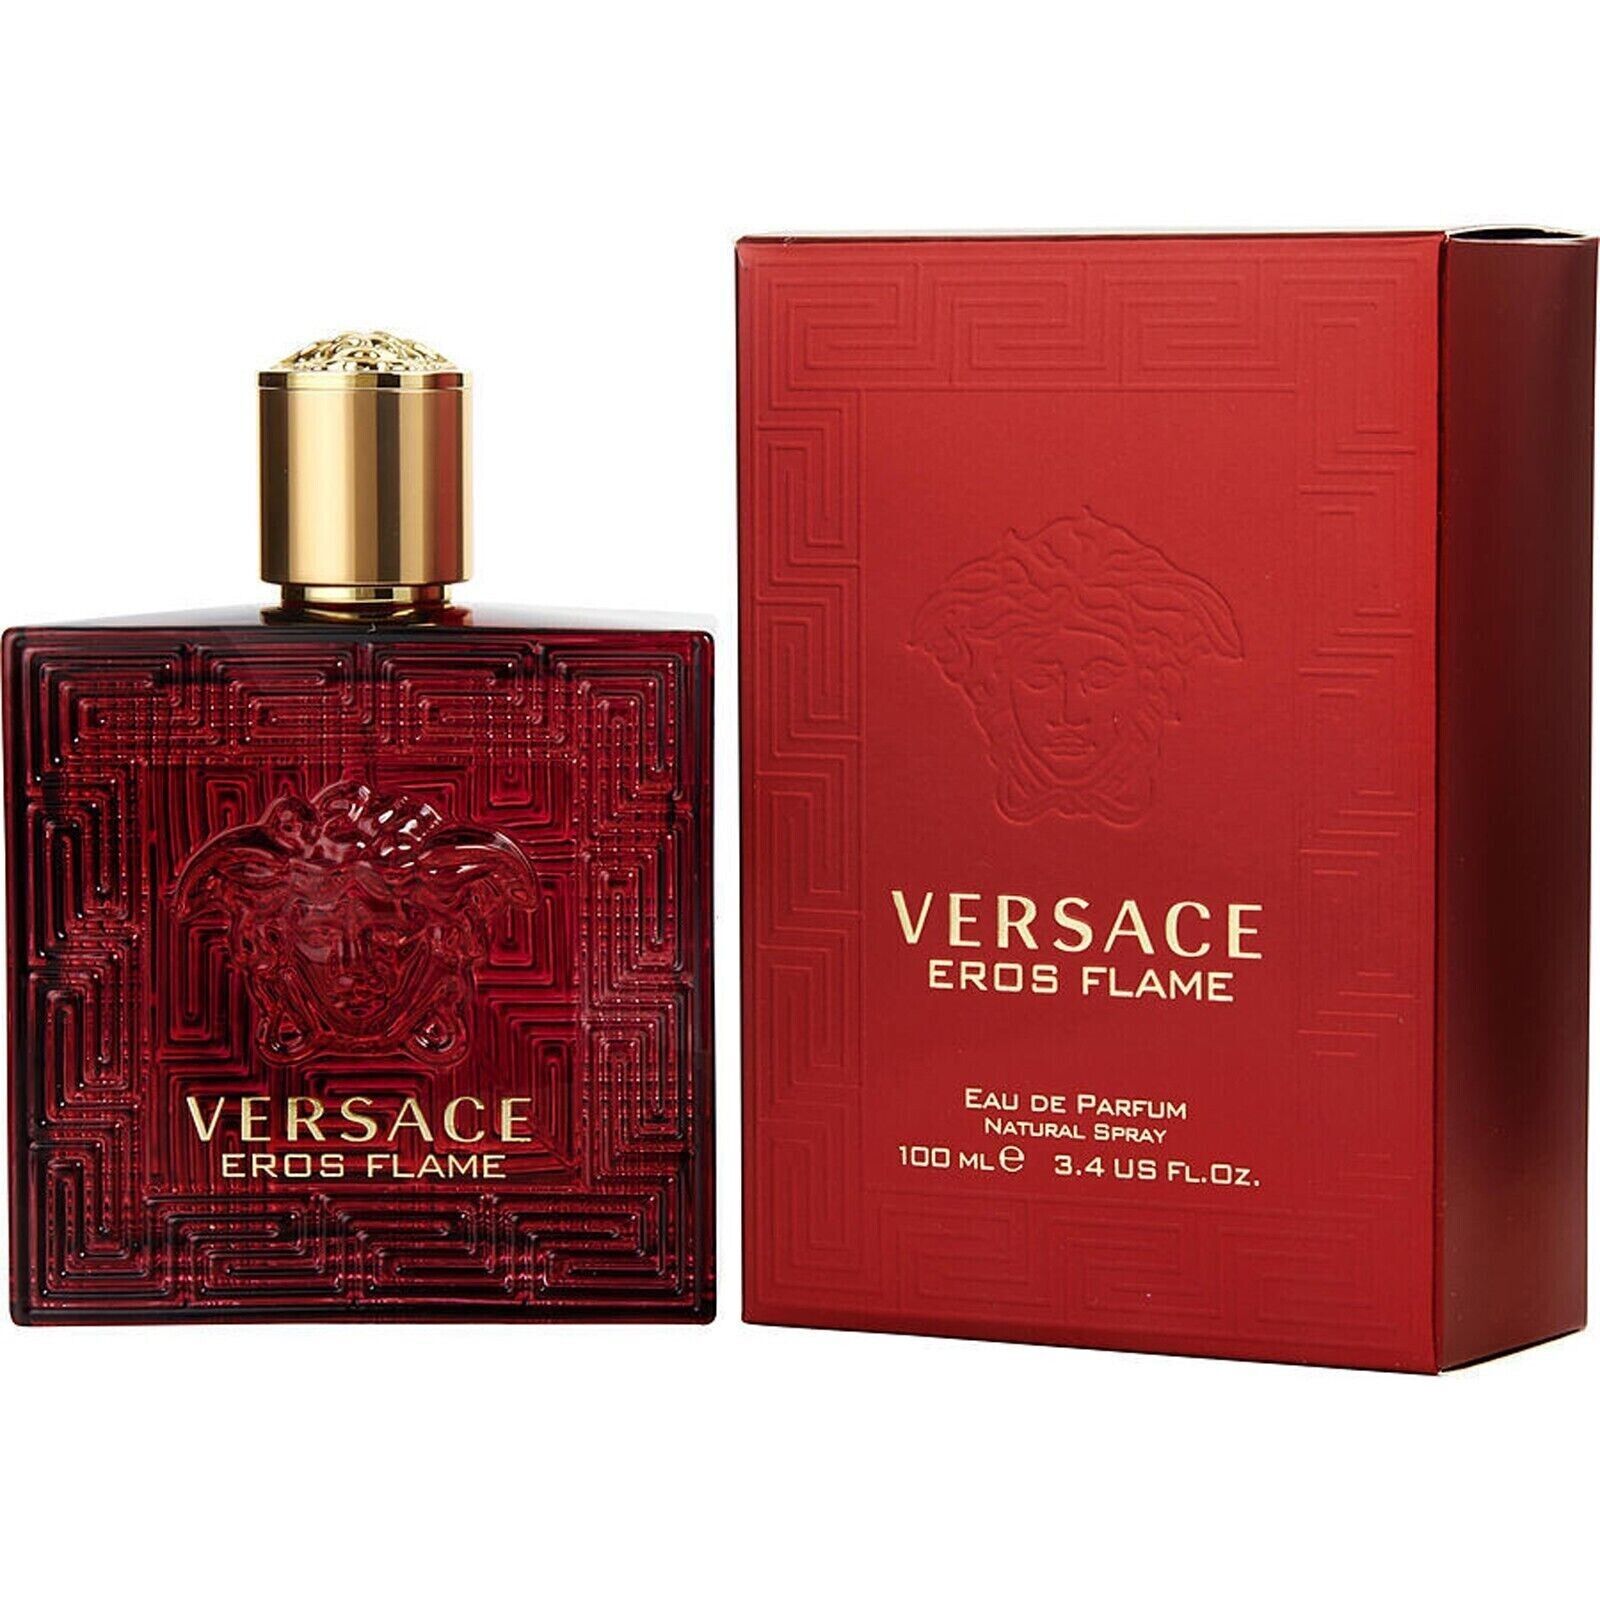 Versace Eros Flame 3.4 oz 100ml EDP Cologne Spray For Men New in Sealed Box